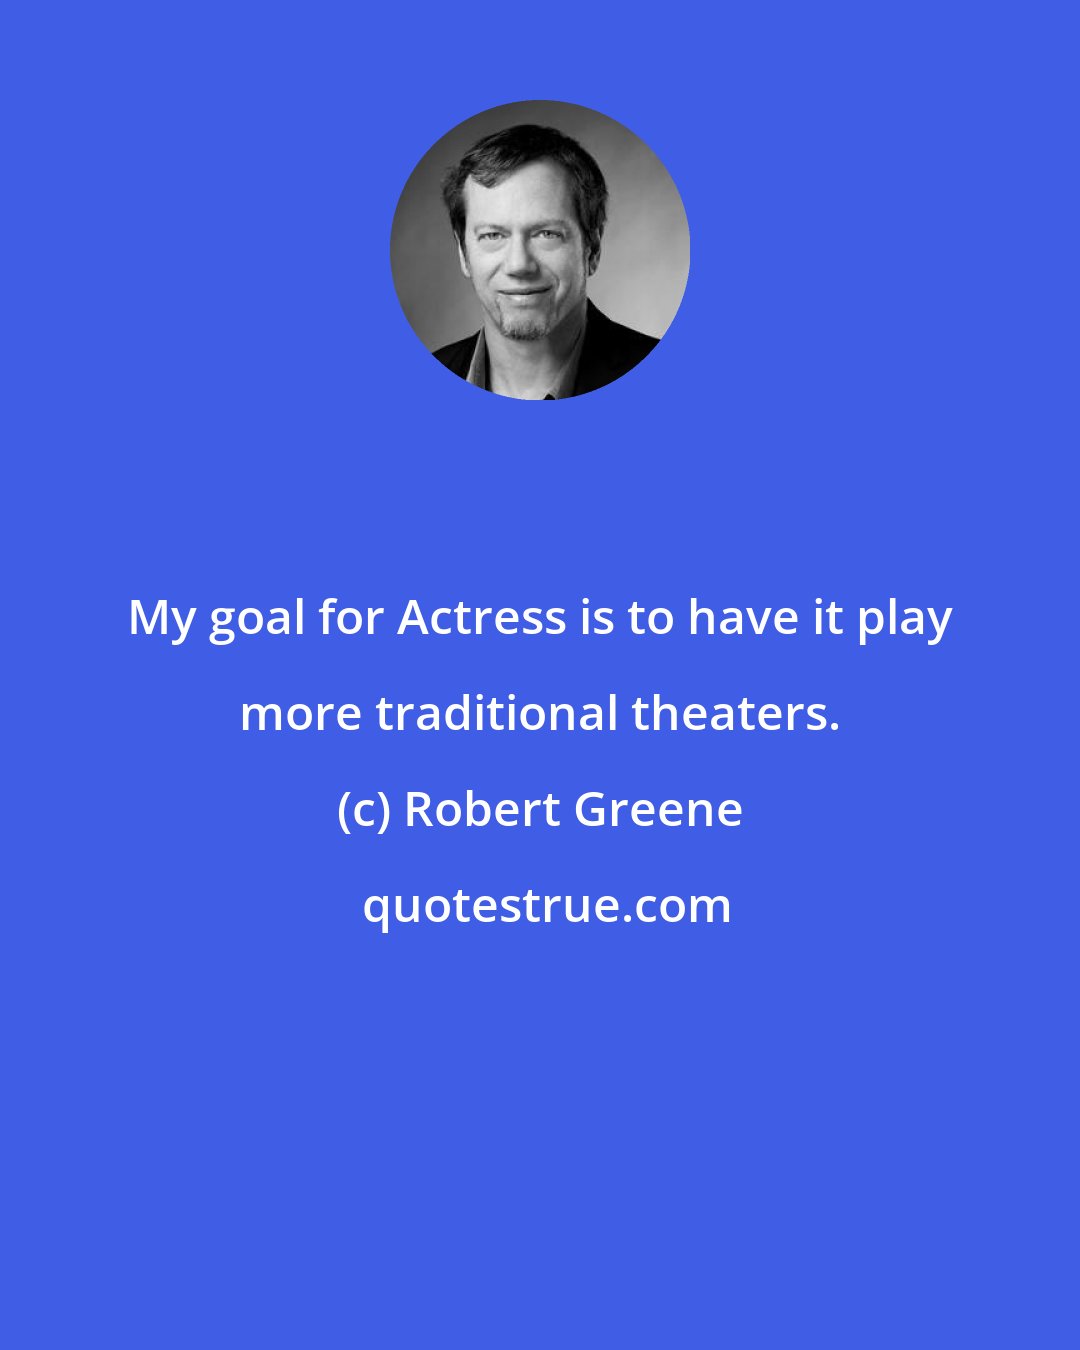 Robert Greene: My goal for Actress is to have it play more traditional theaters.